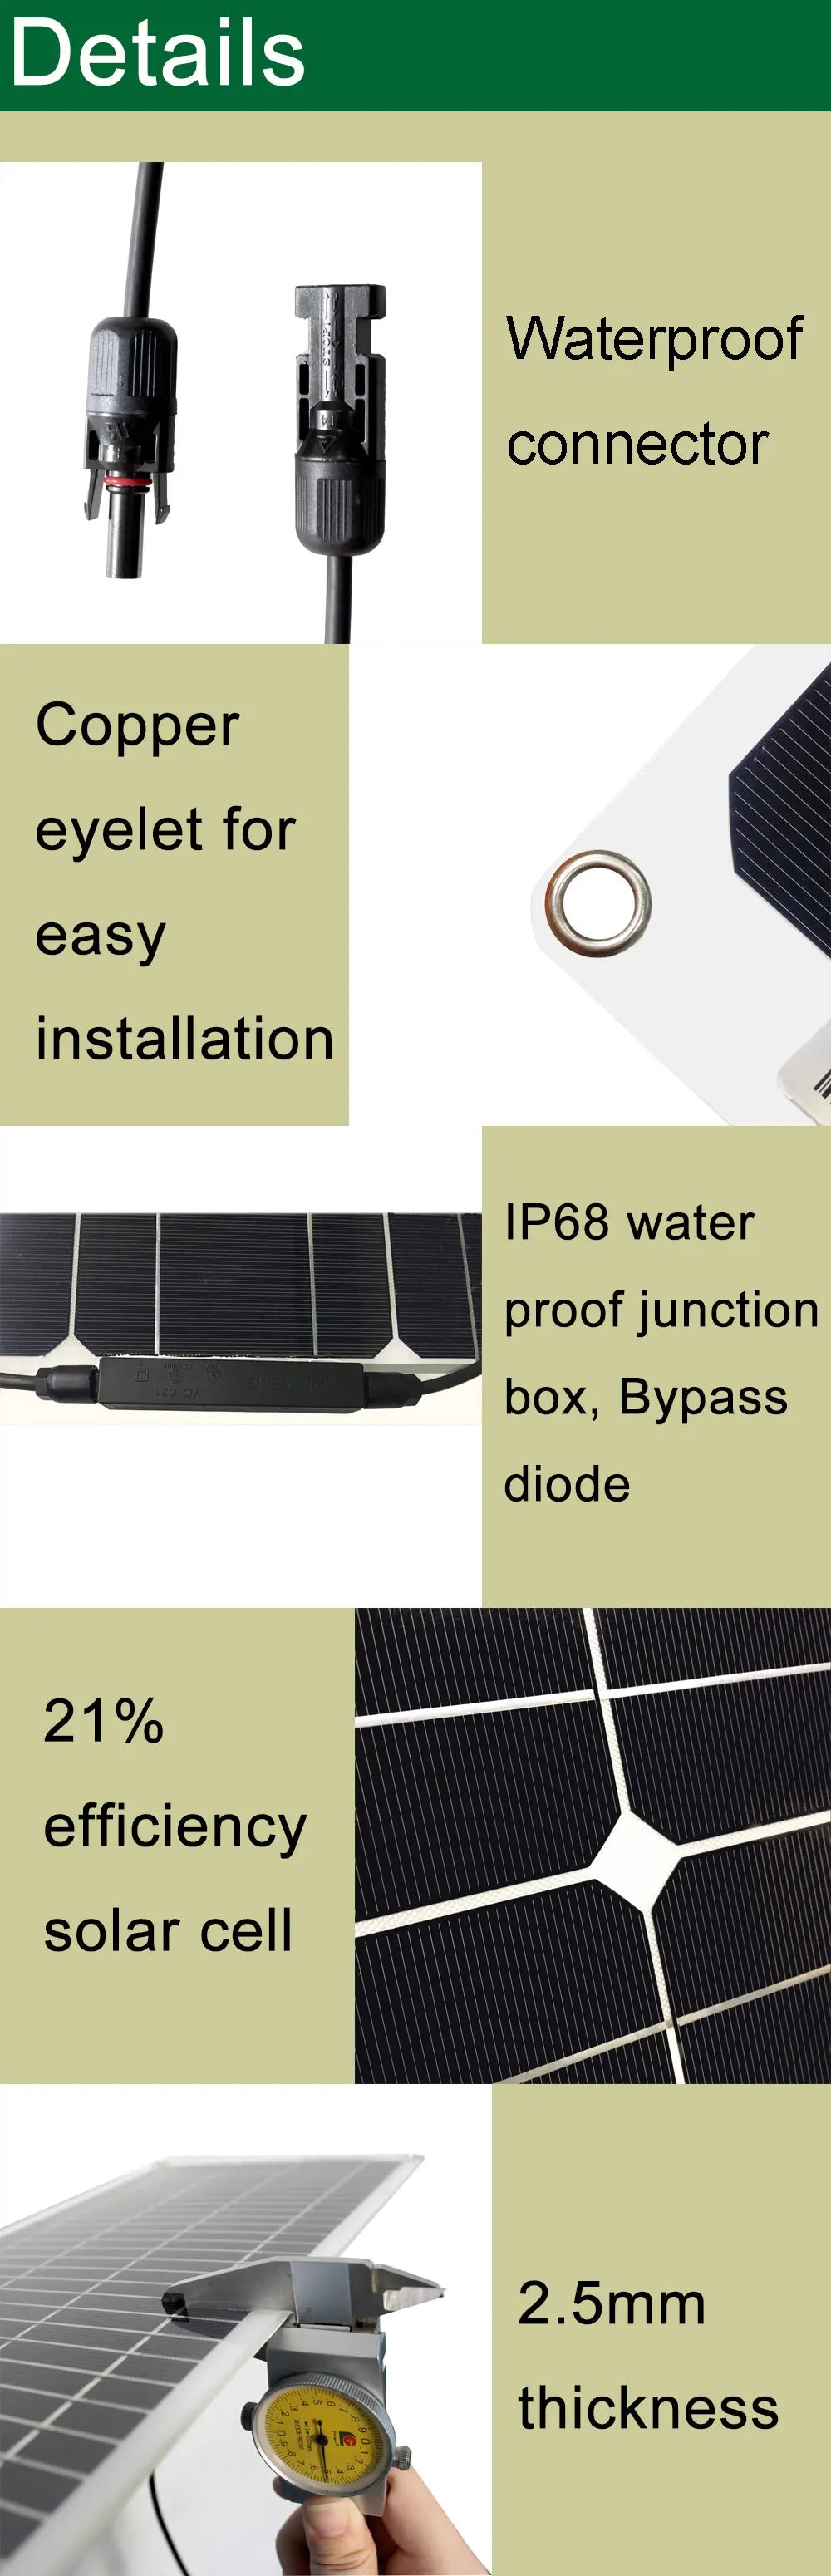 300w solar panel, Waterproof features: connectors, eyelets, and junction box make this solar panel durable and easy to install.